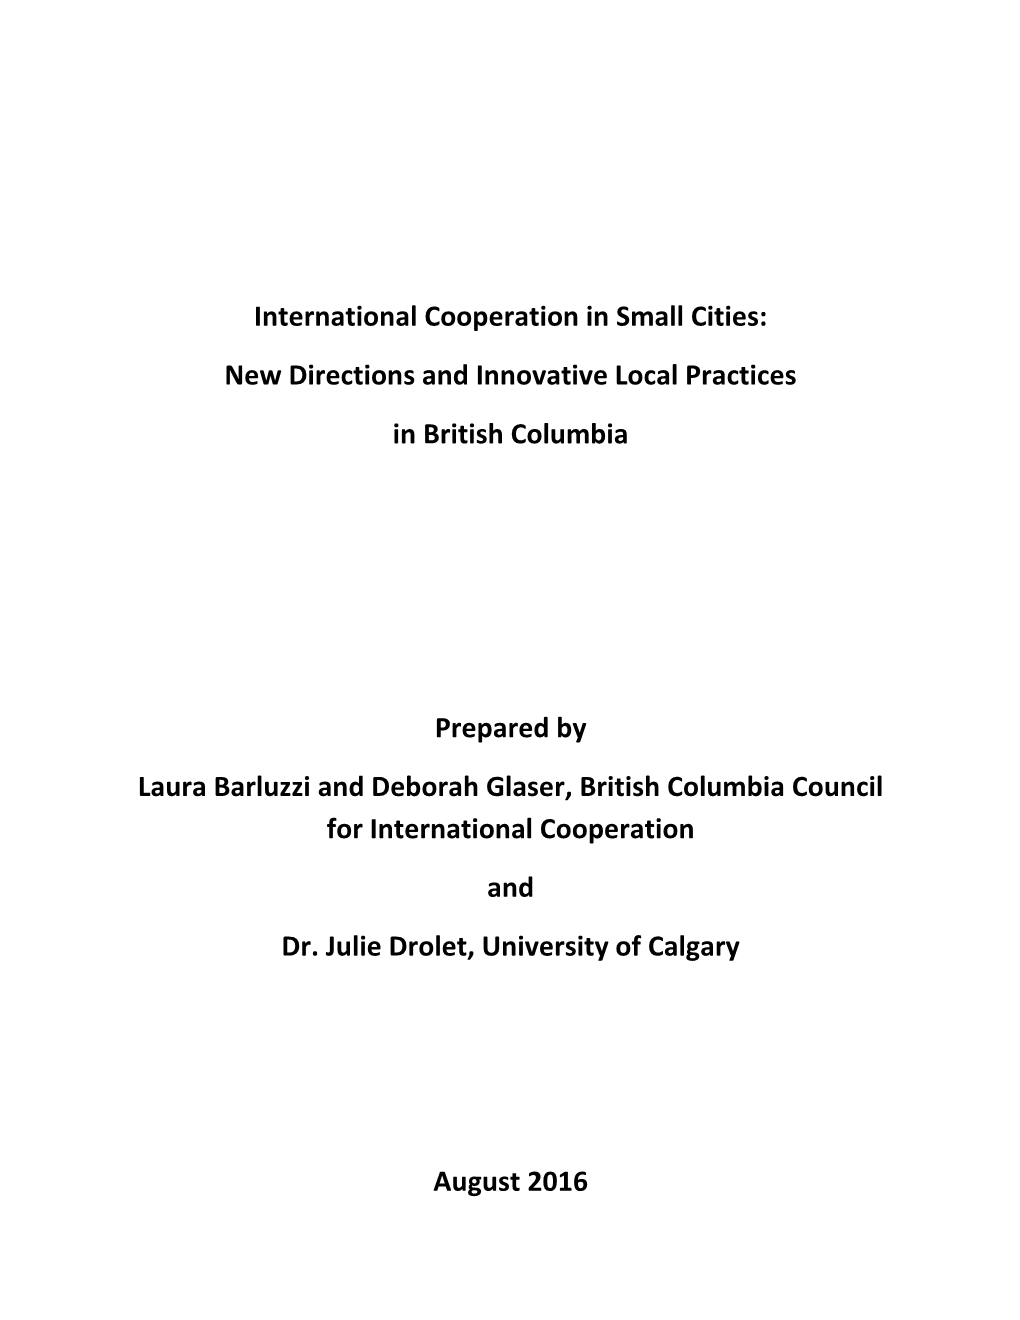 International Cooperation in Small Cities: New Directions and Innovative Local Practices in British Columbia